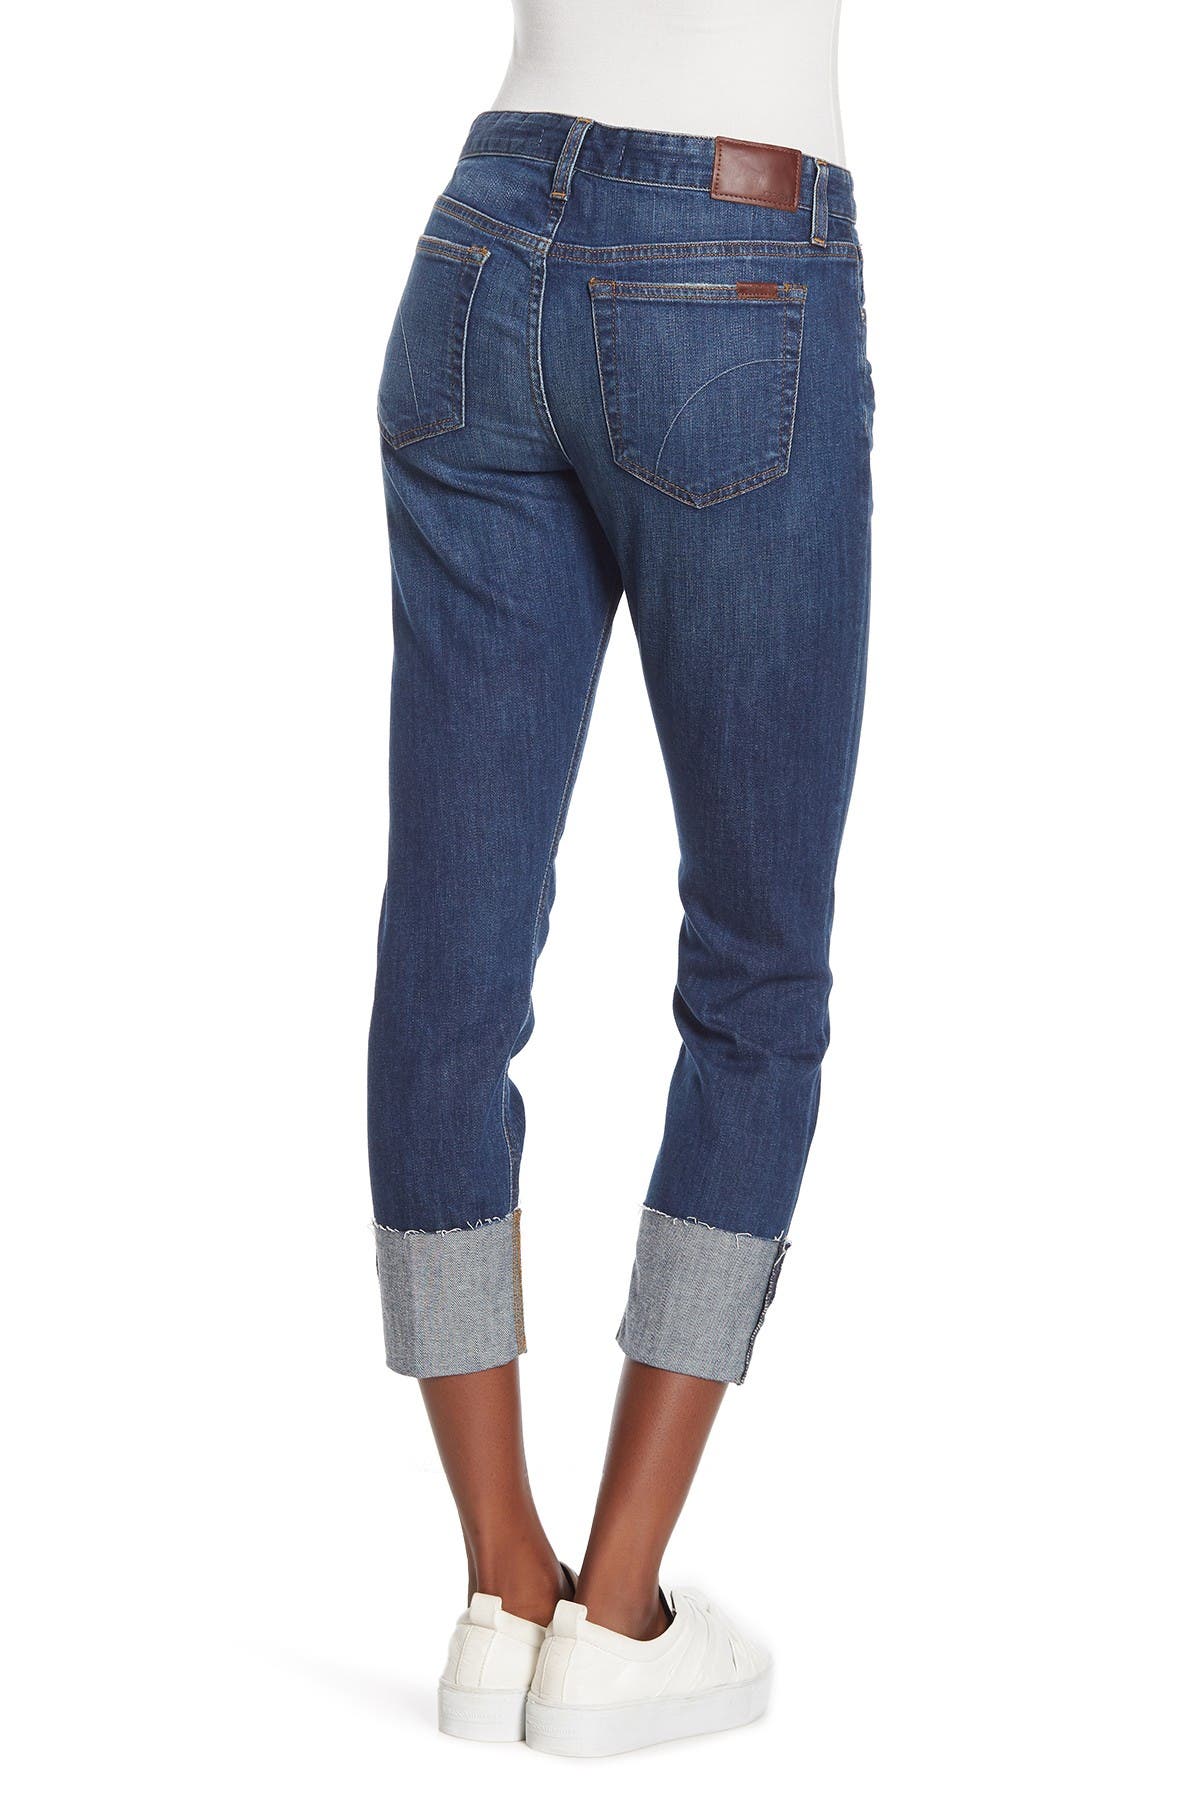 joe's jeans the smith mid rise straight crop